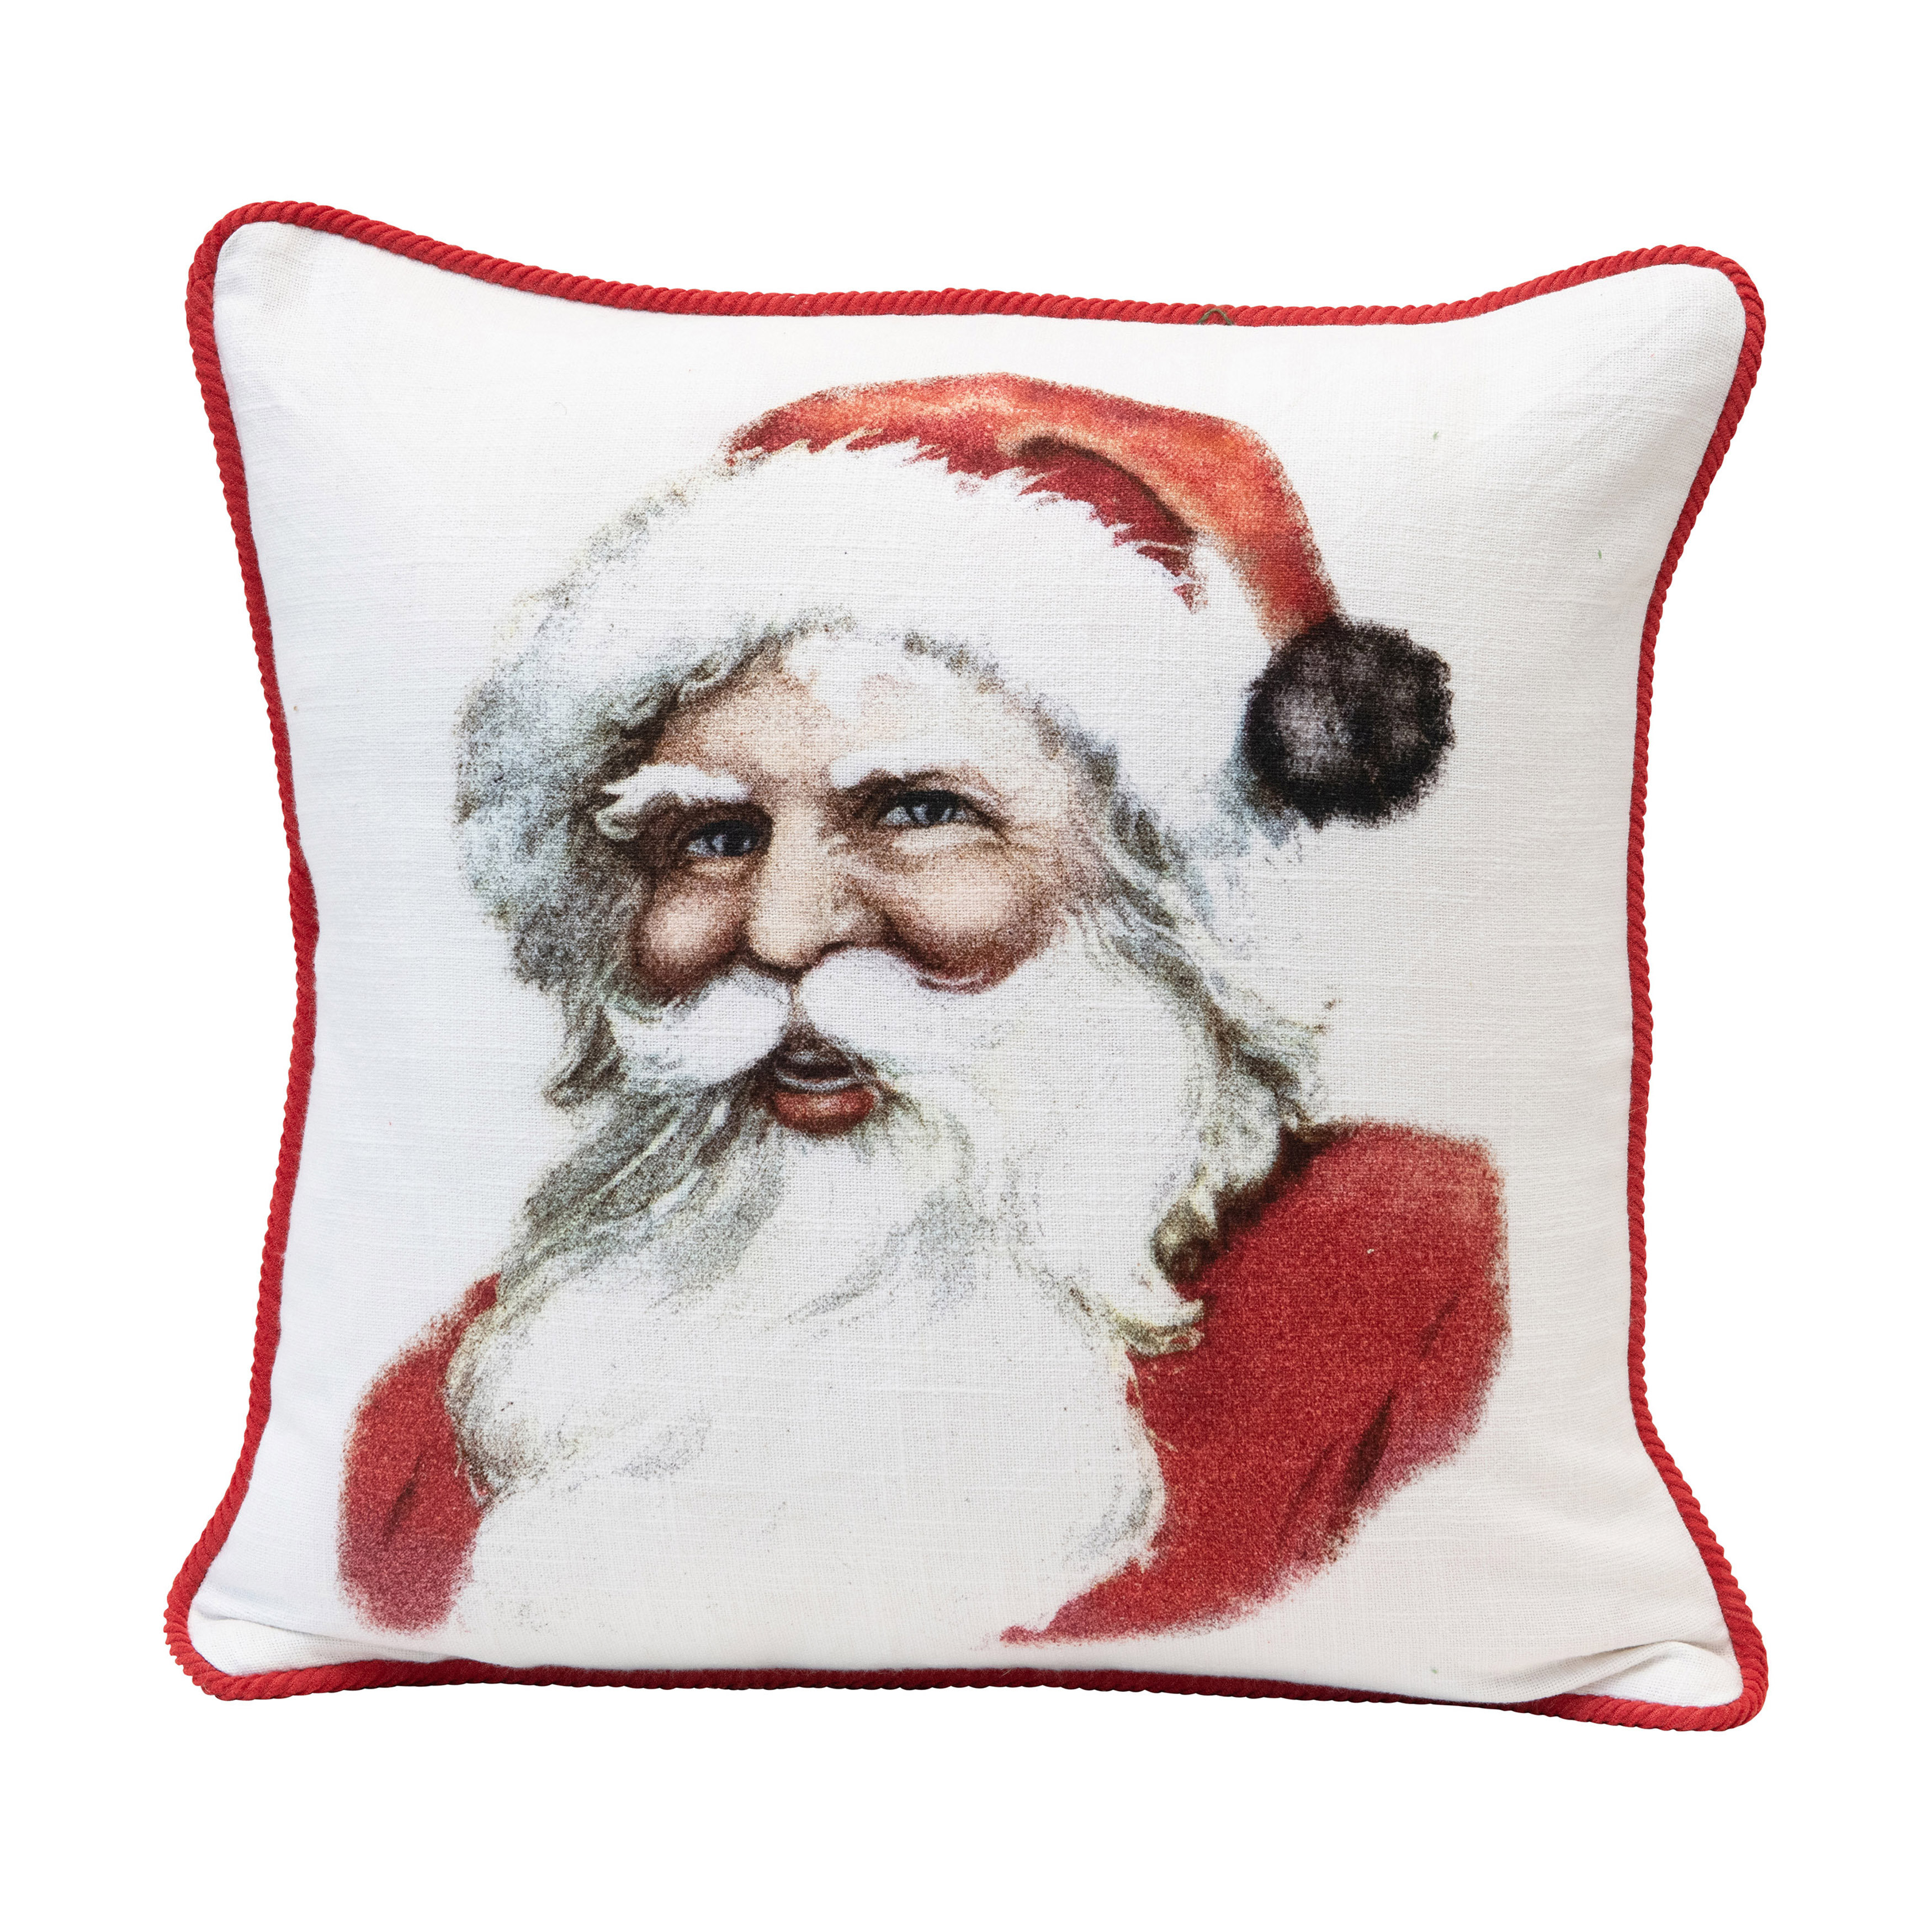 Christmas cute outfits Merry Christmas Cute Santa Holidays Elements Throw Pillow 18x18 Multicolor 